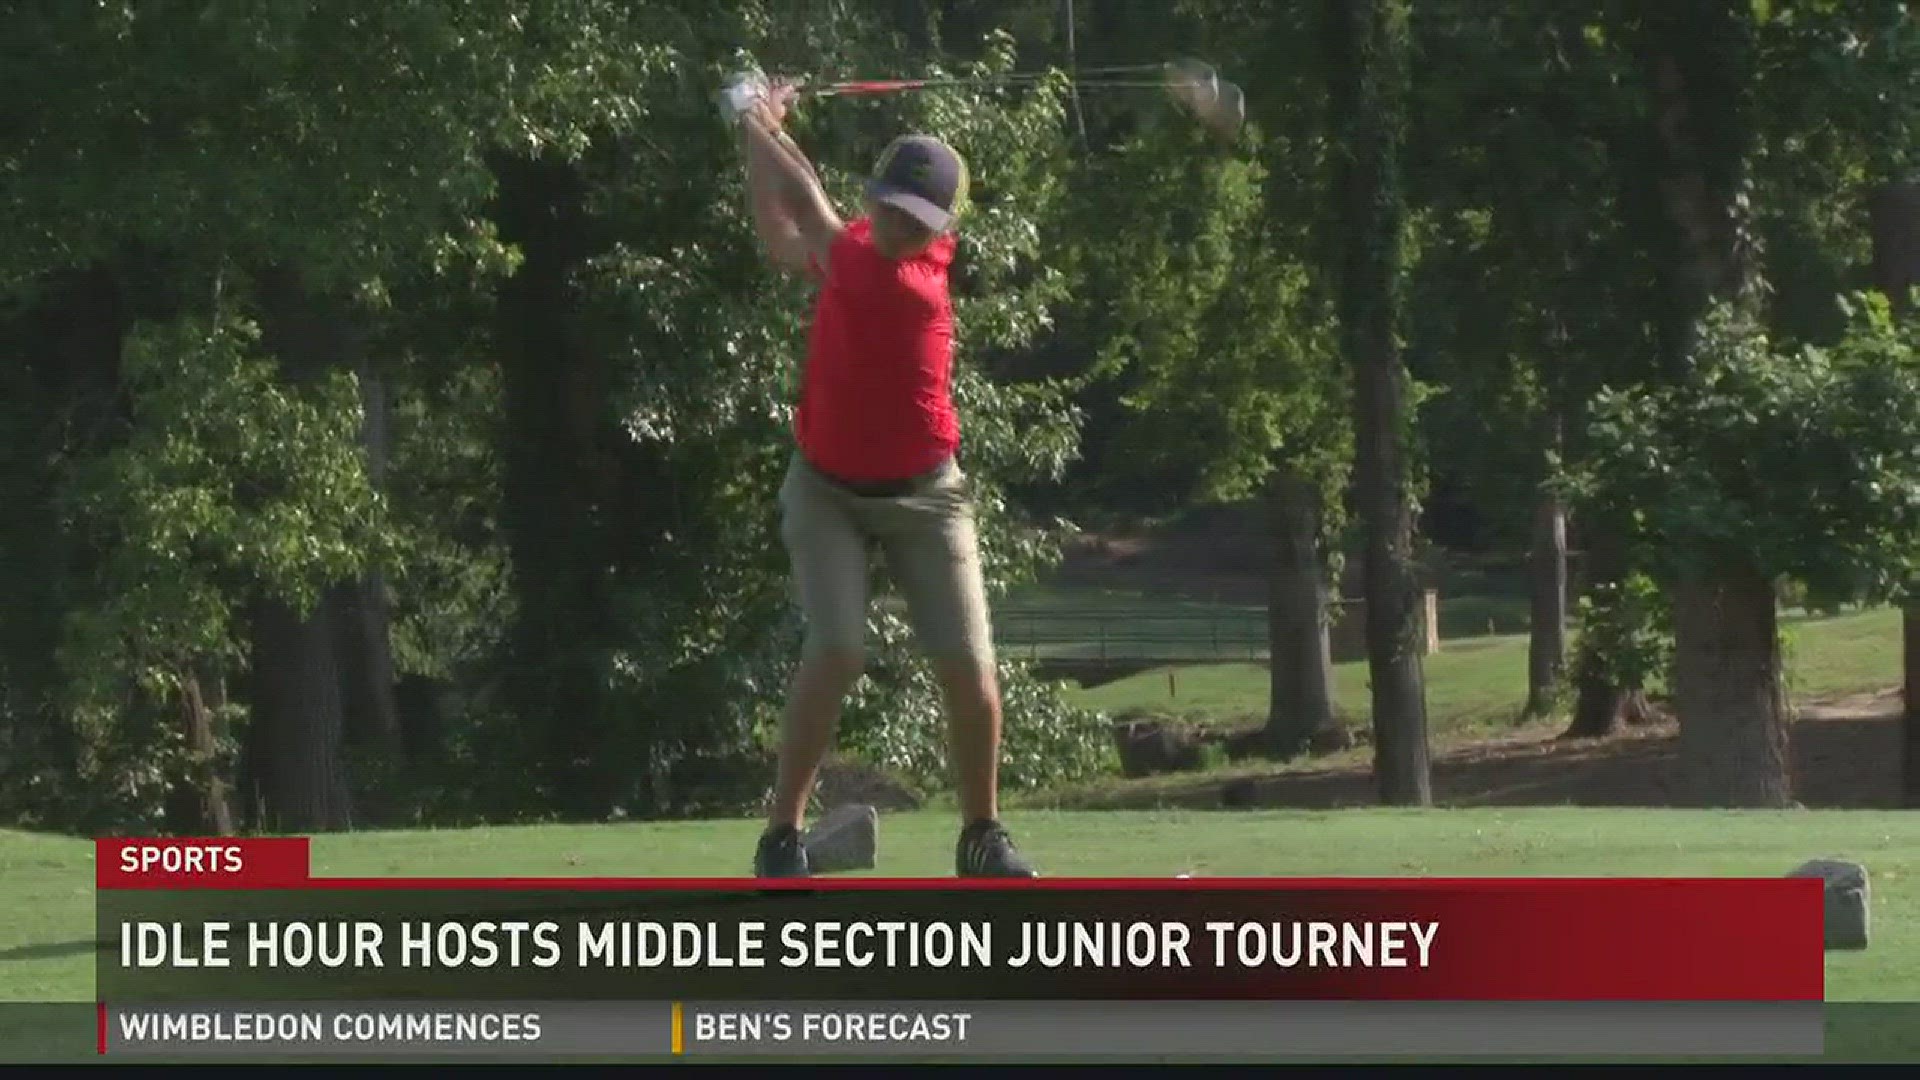 Idle Hour hosts middle section junior tourney